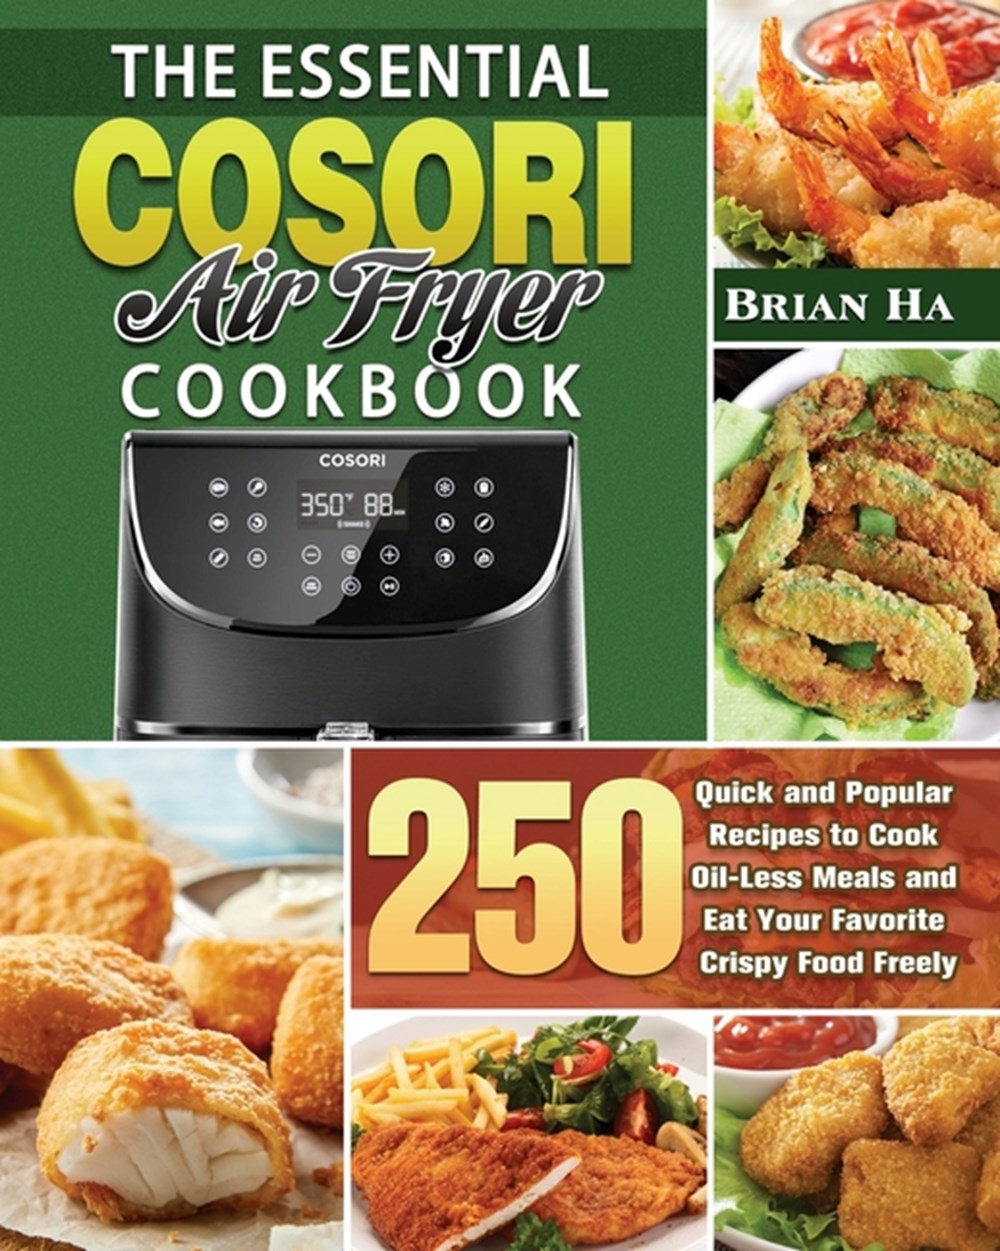 Buy The Essential COSORI AIR FRYER Cookbook 250 Quick and Popular